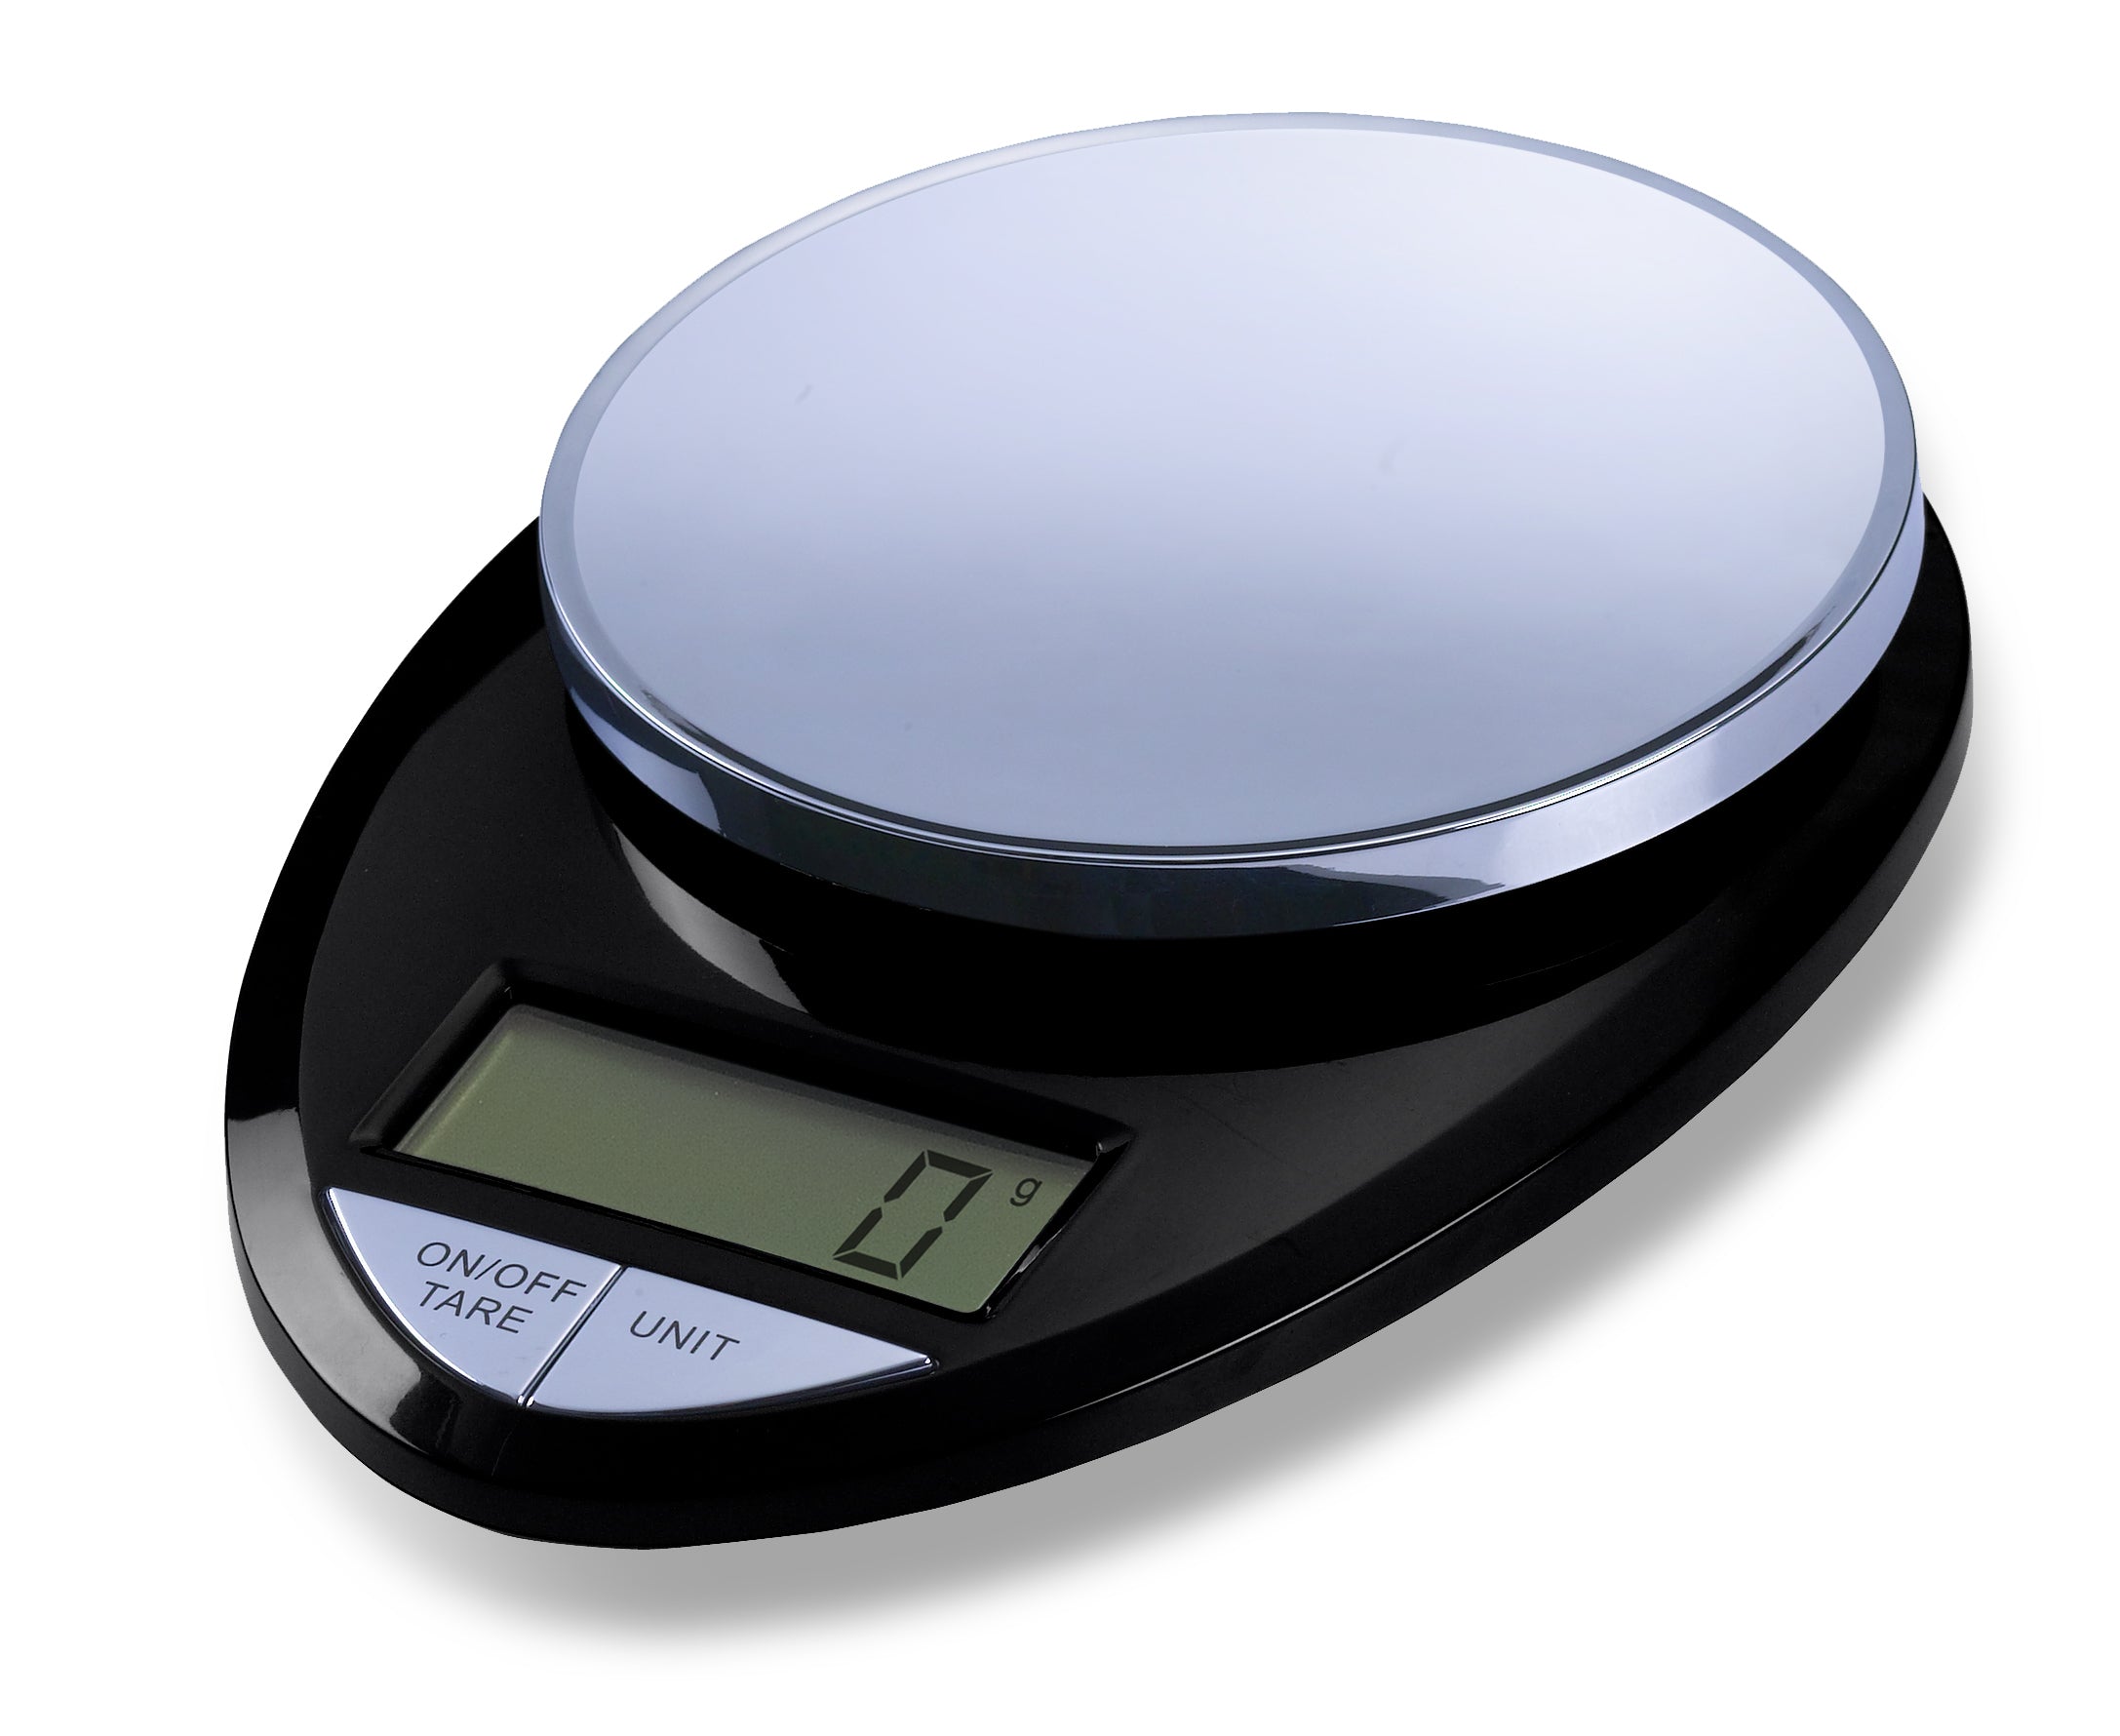 Eat Smart Digital Nutrition Food Scale with Professional Food and Nutrient  Calculator